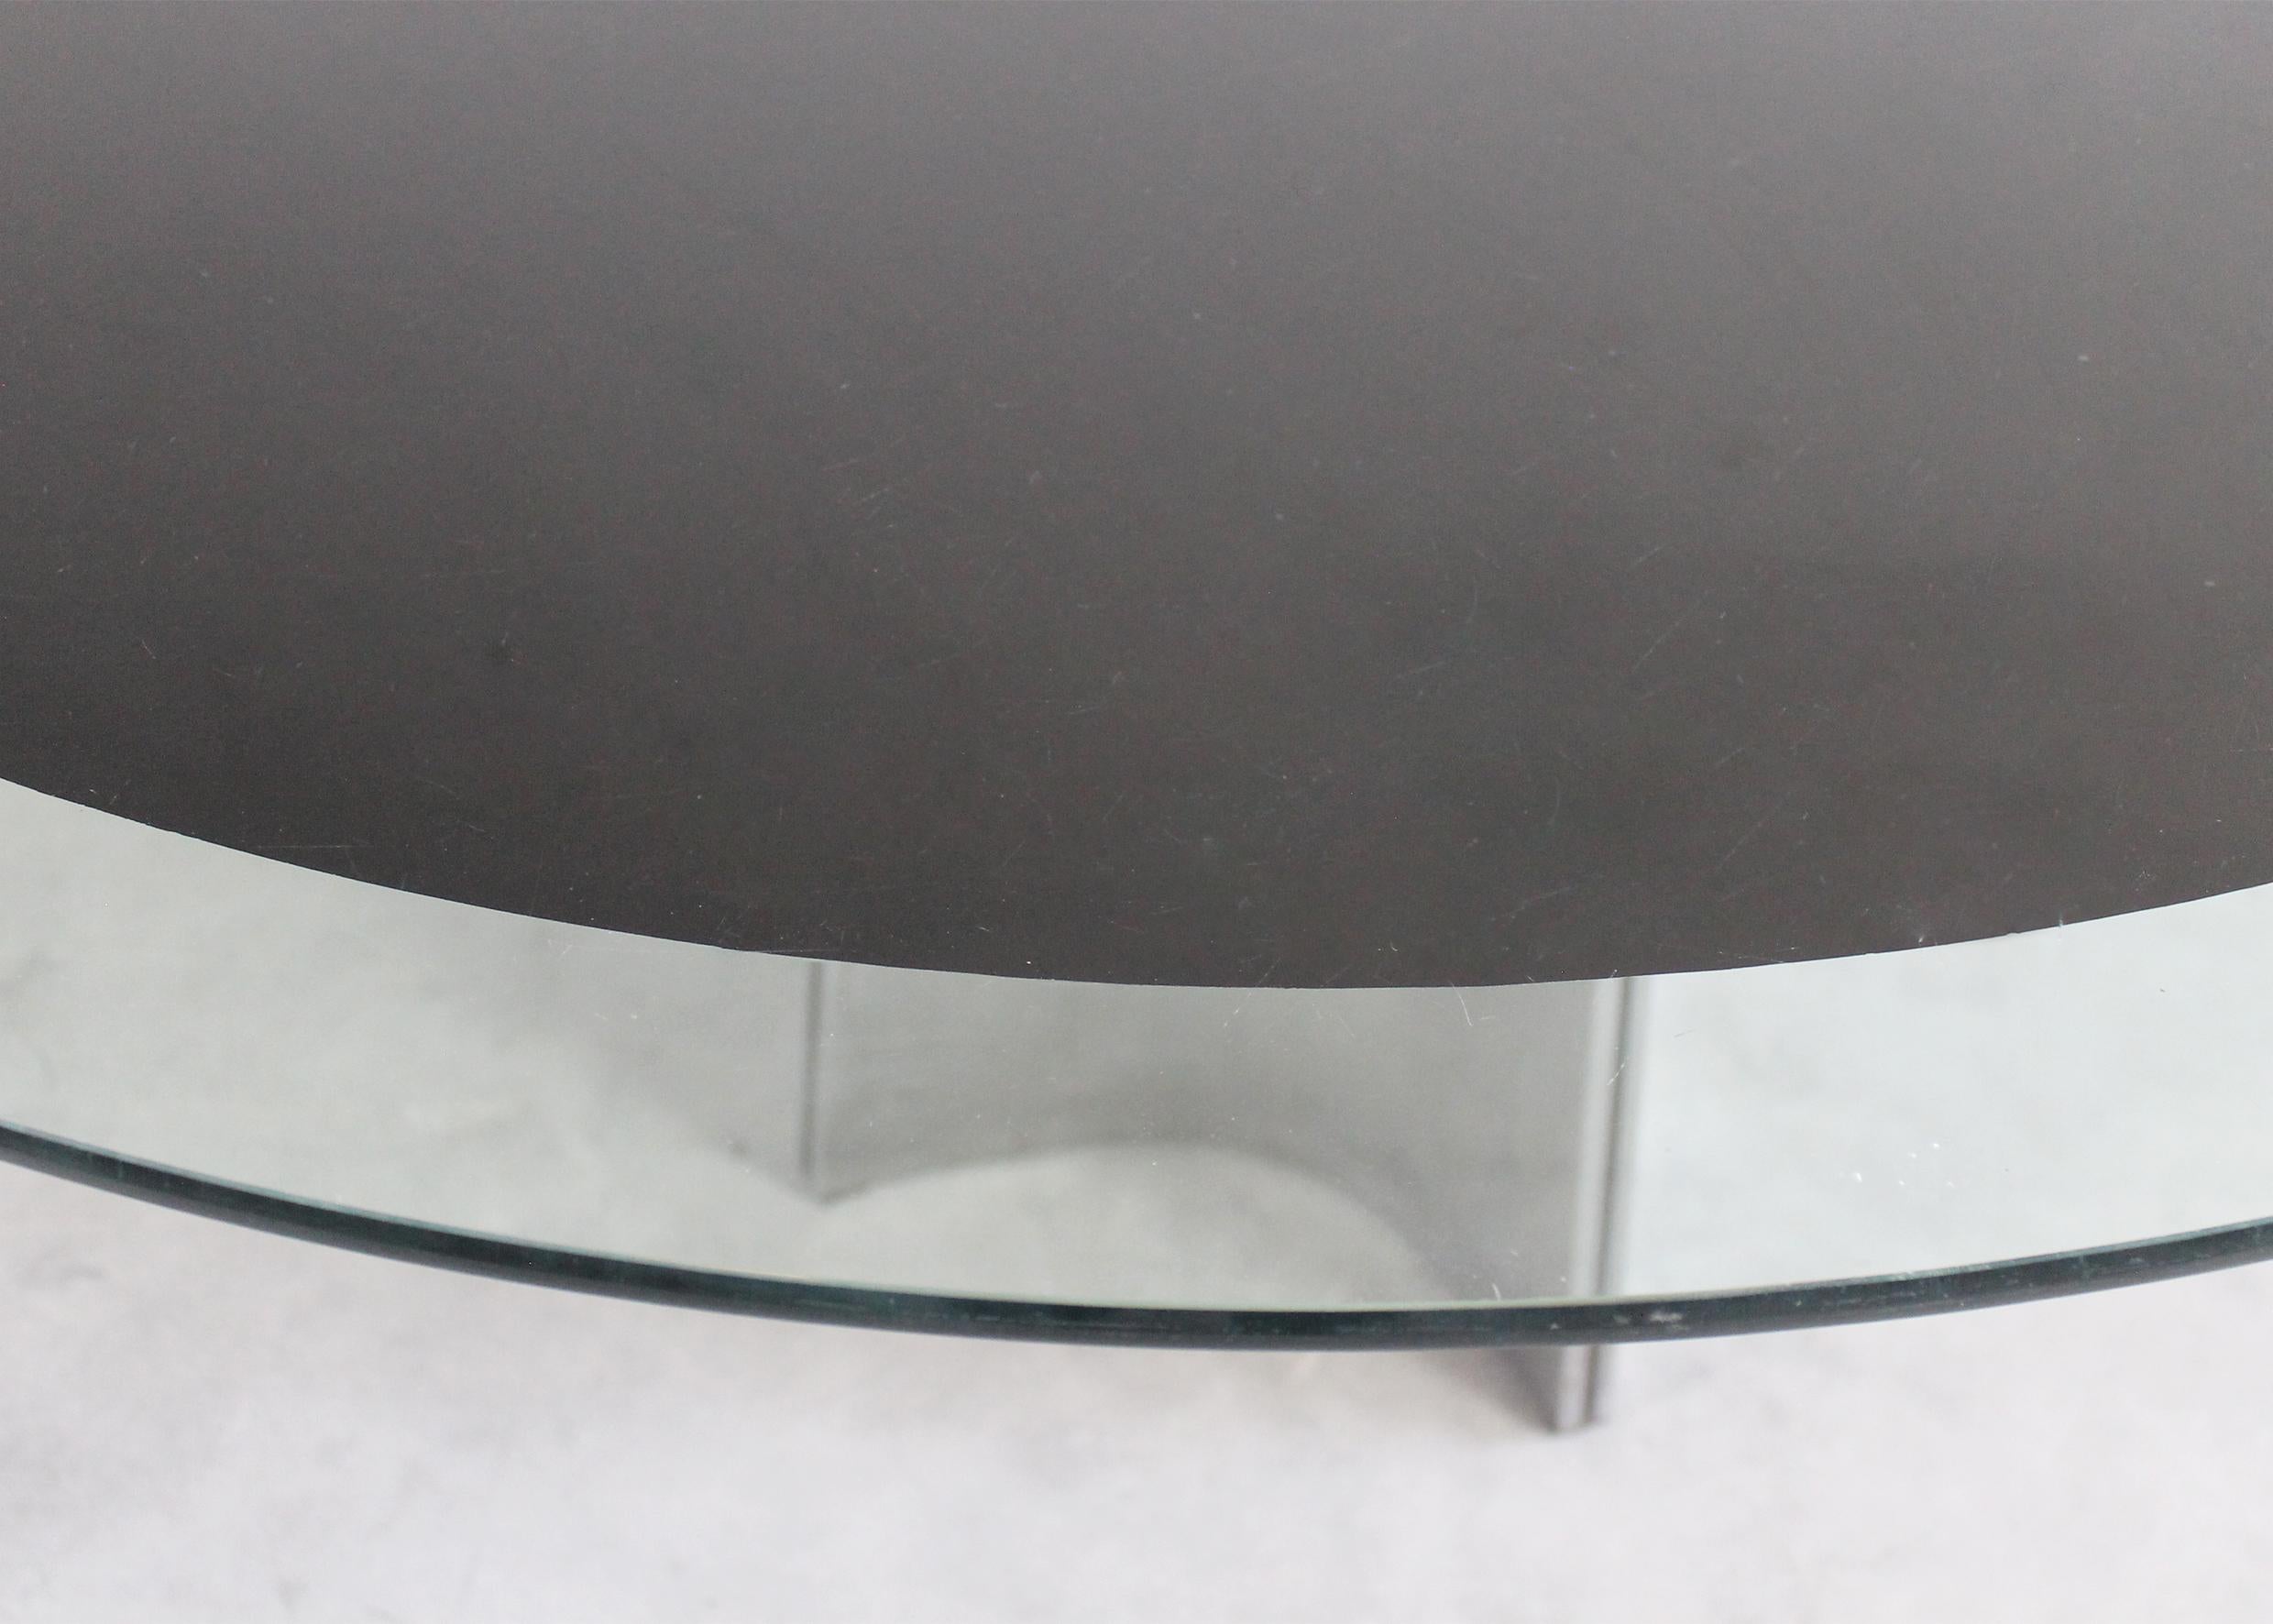 French Luigi Saccardo UFO Pedestal Table in Steel and Glass by Maison Jansen 1970s For Sale